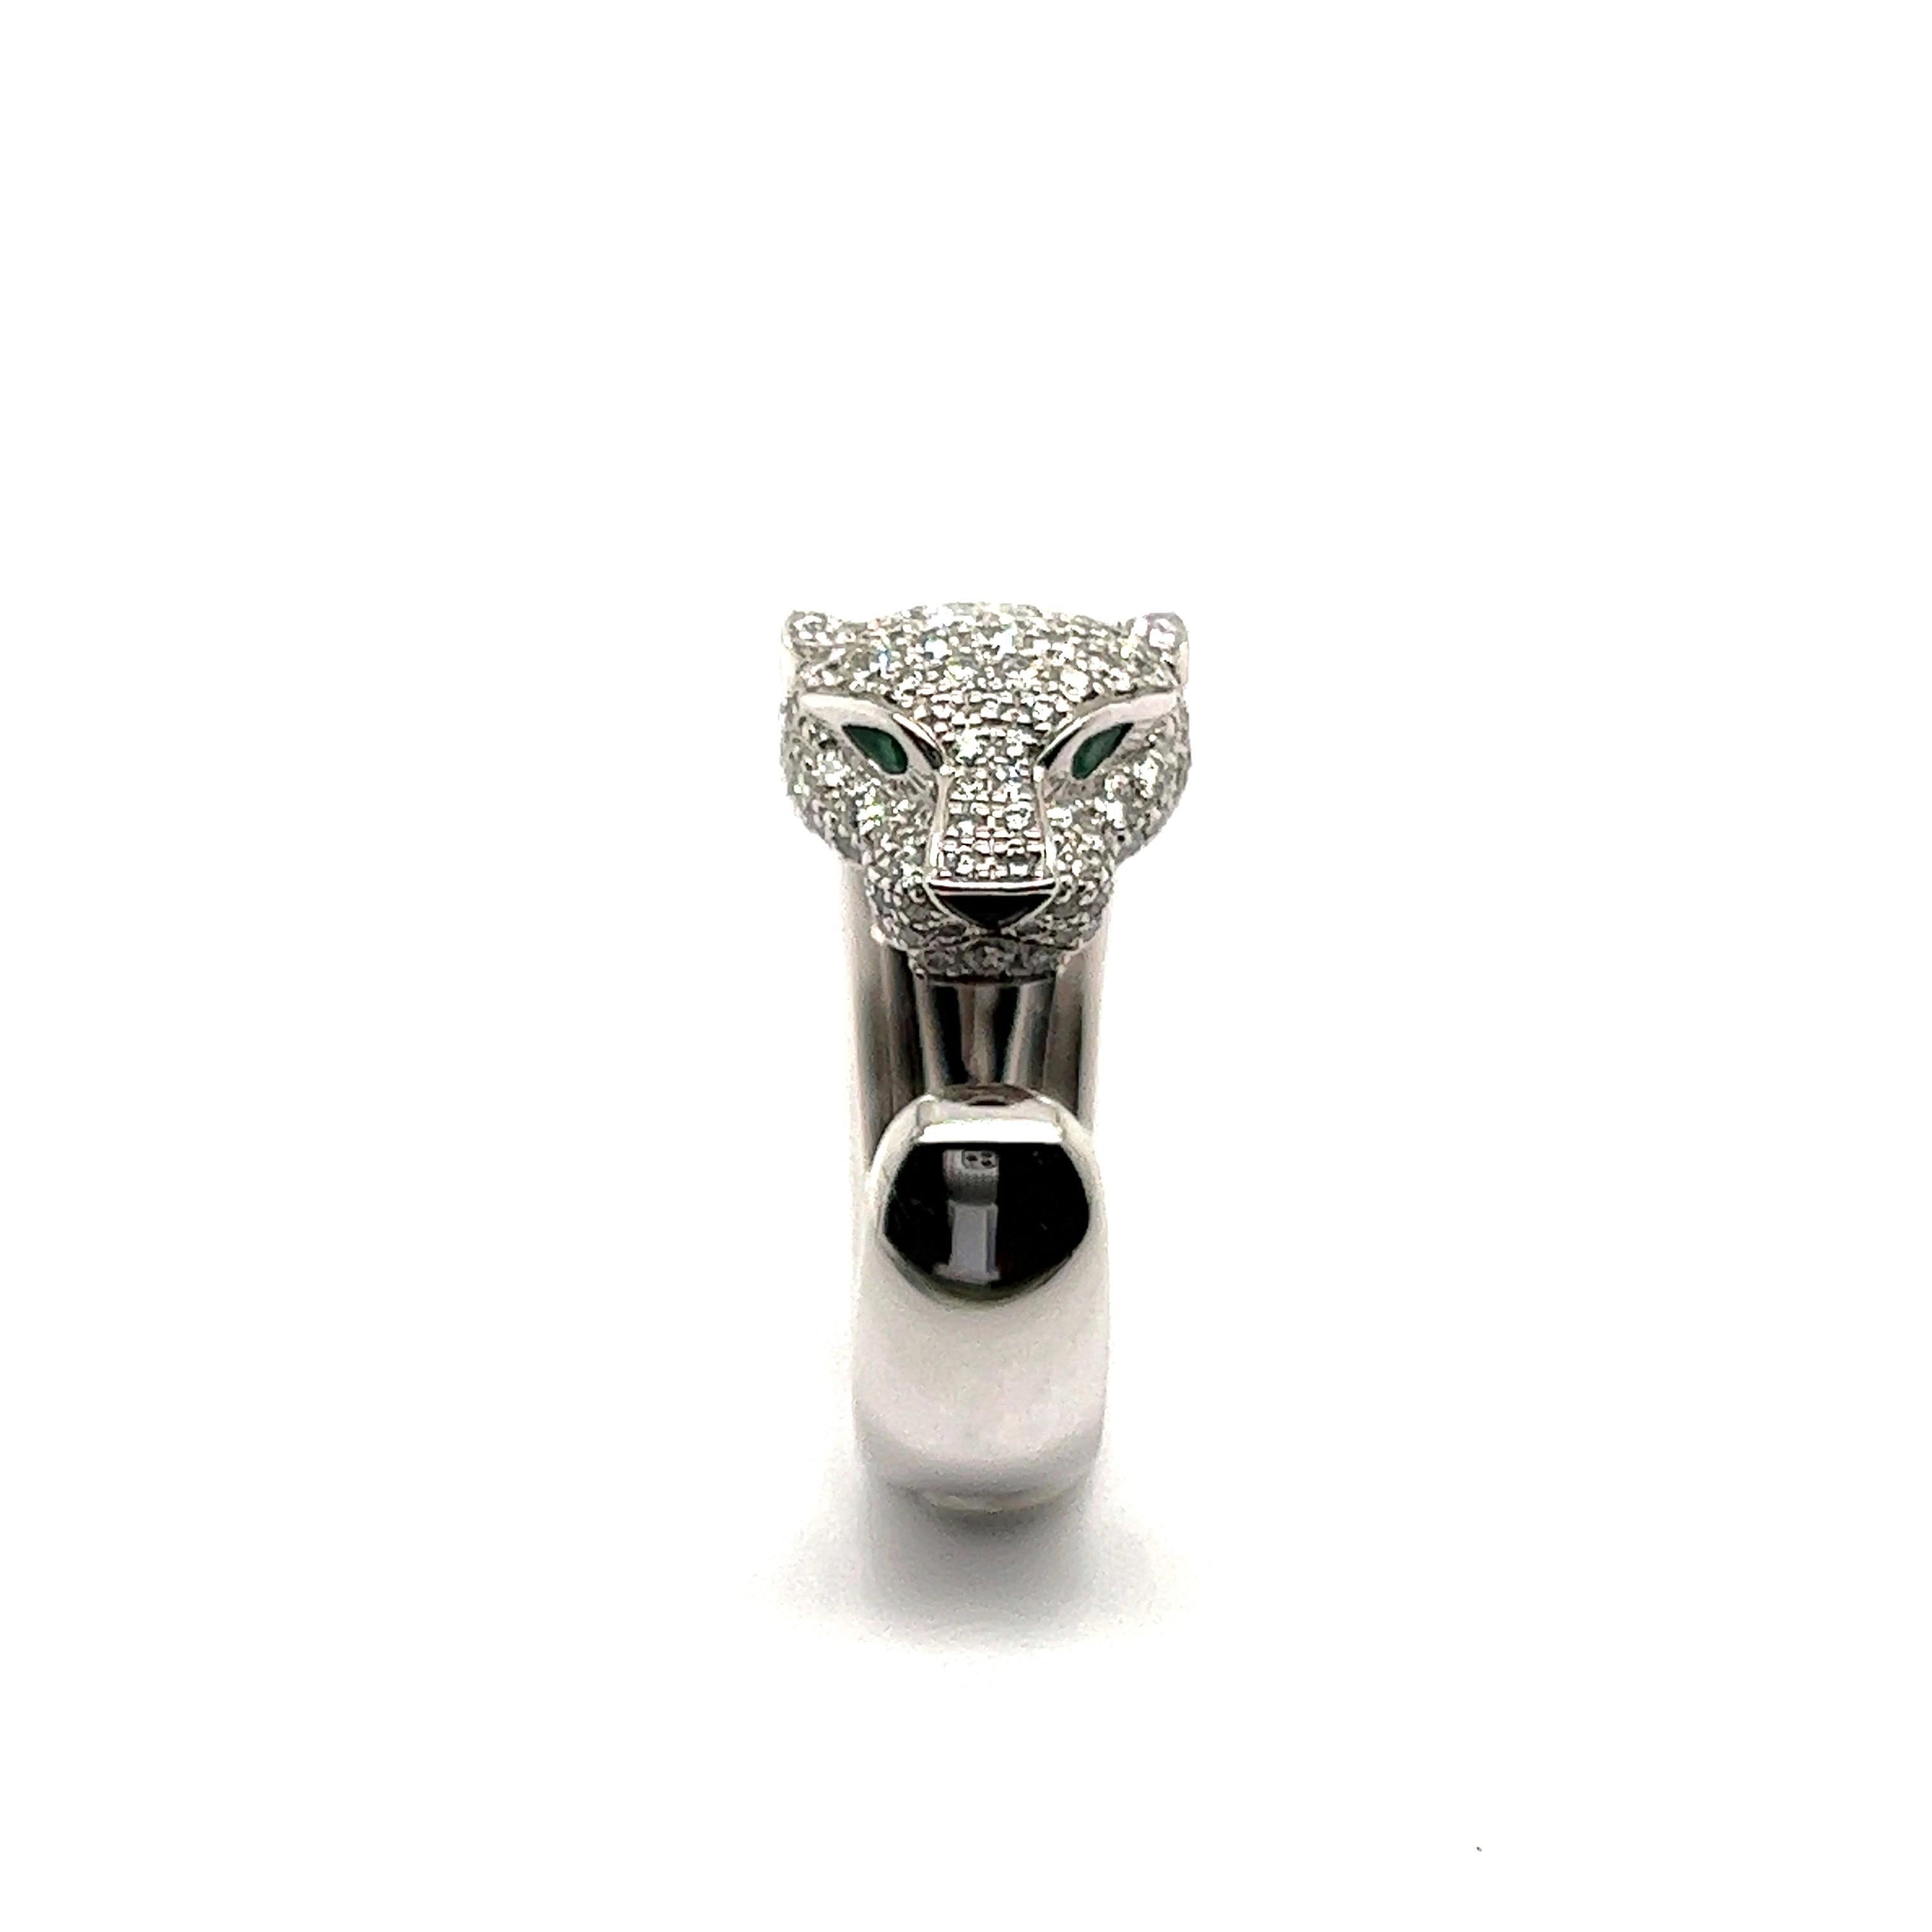 Panthère de Cartier ring, white gold 750/1000, onyx, set with 2 emeralds and 137 brilliant-cut diamonds totalling 1.15 carats. 

Comes in original box but no papers. 

Size: 51 EU / 5.25 US
Numberd: 37148C
Maker's mark: Cartier
Assay mark: 750